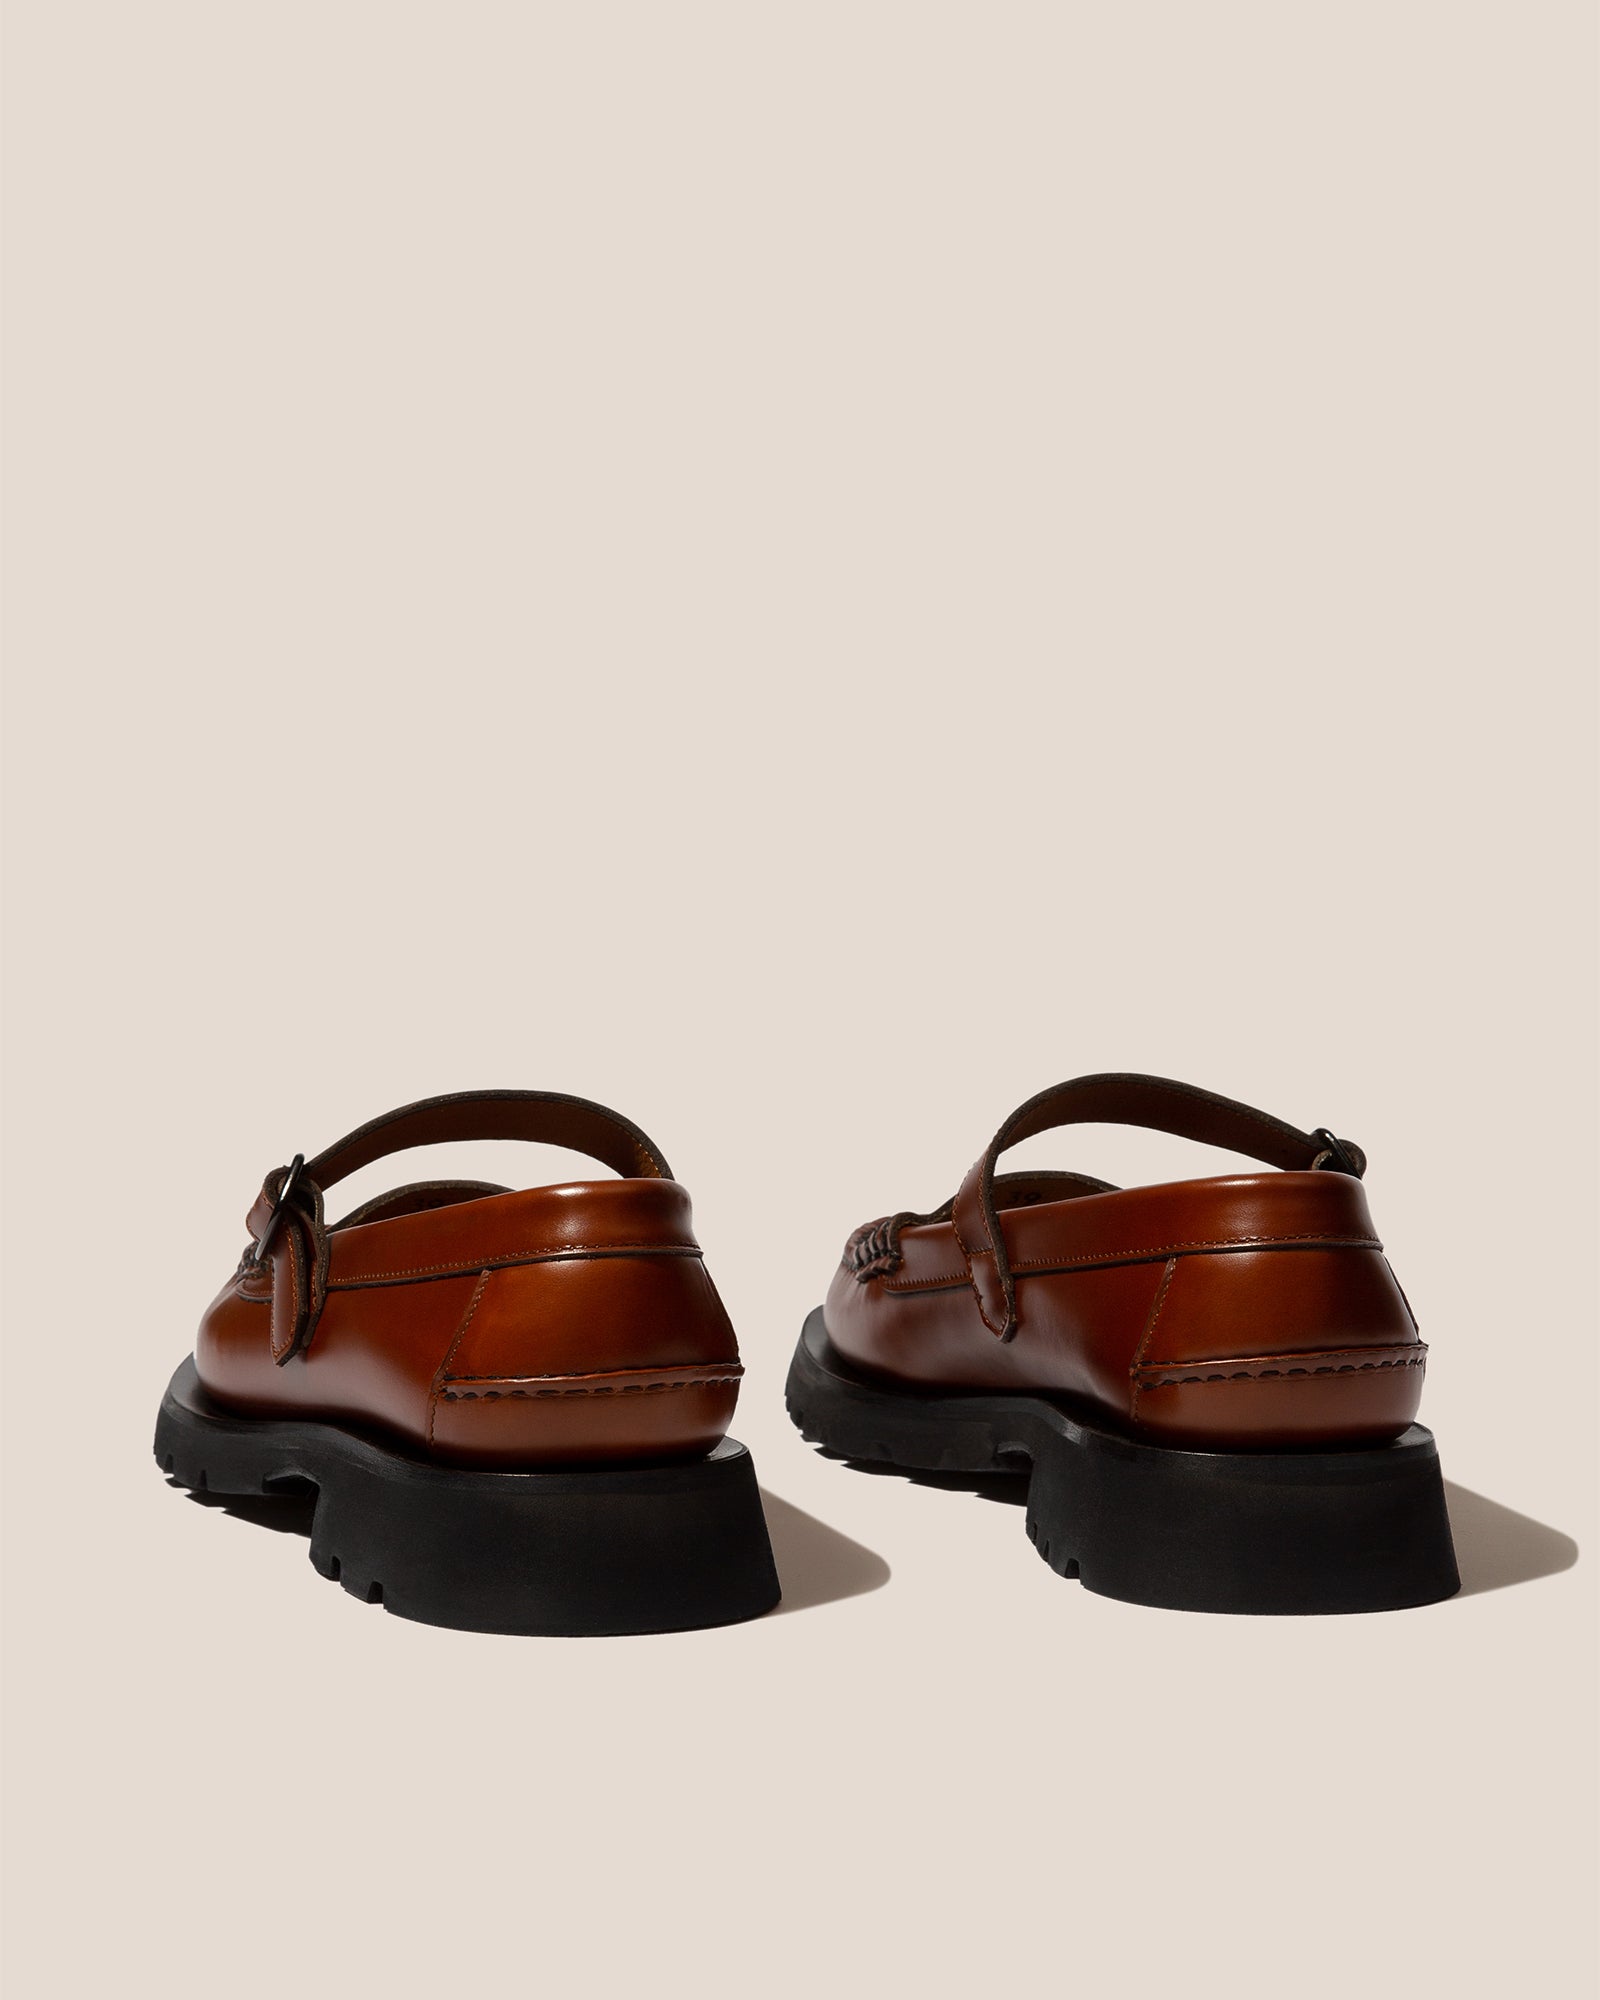 Louis Vuitton Womens Sandals, Brown, Please Contact US for Other Inquiries